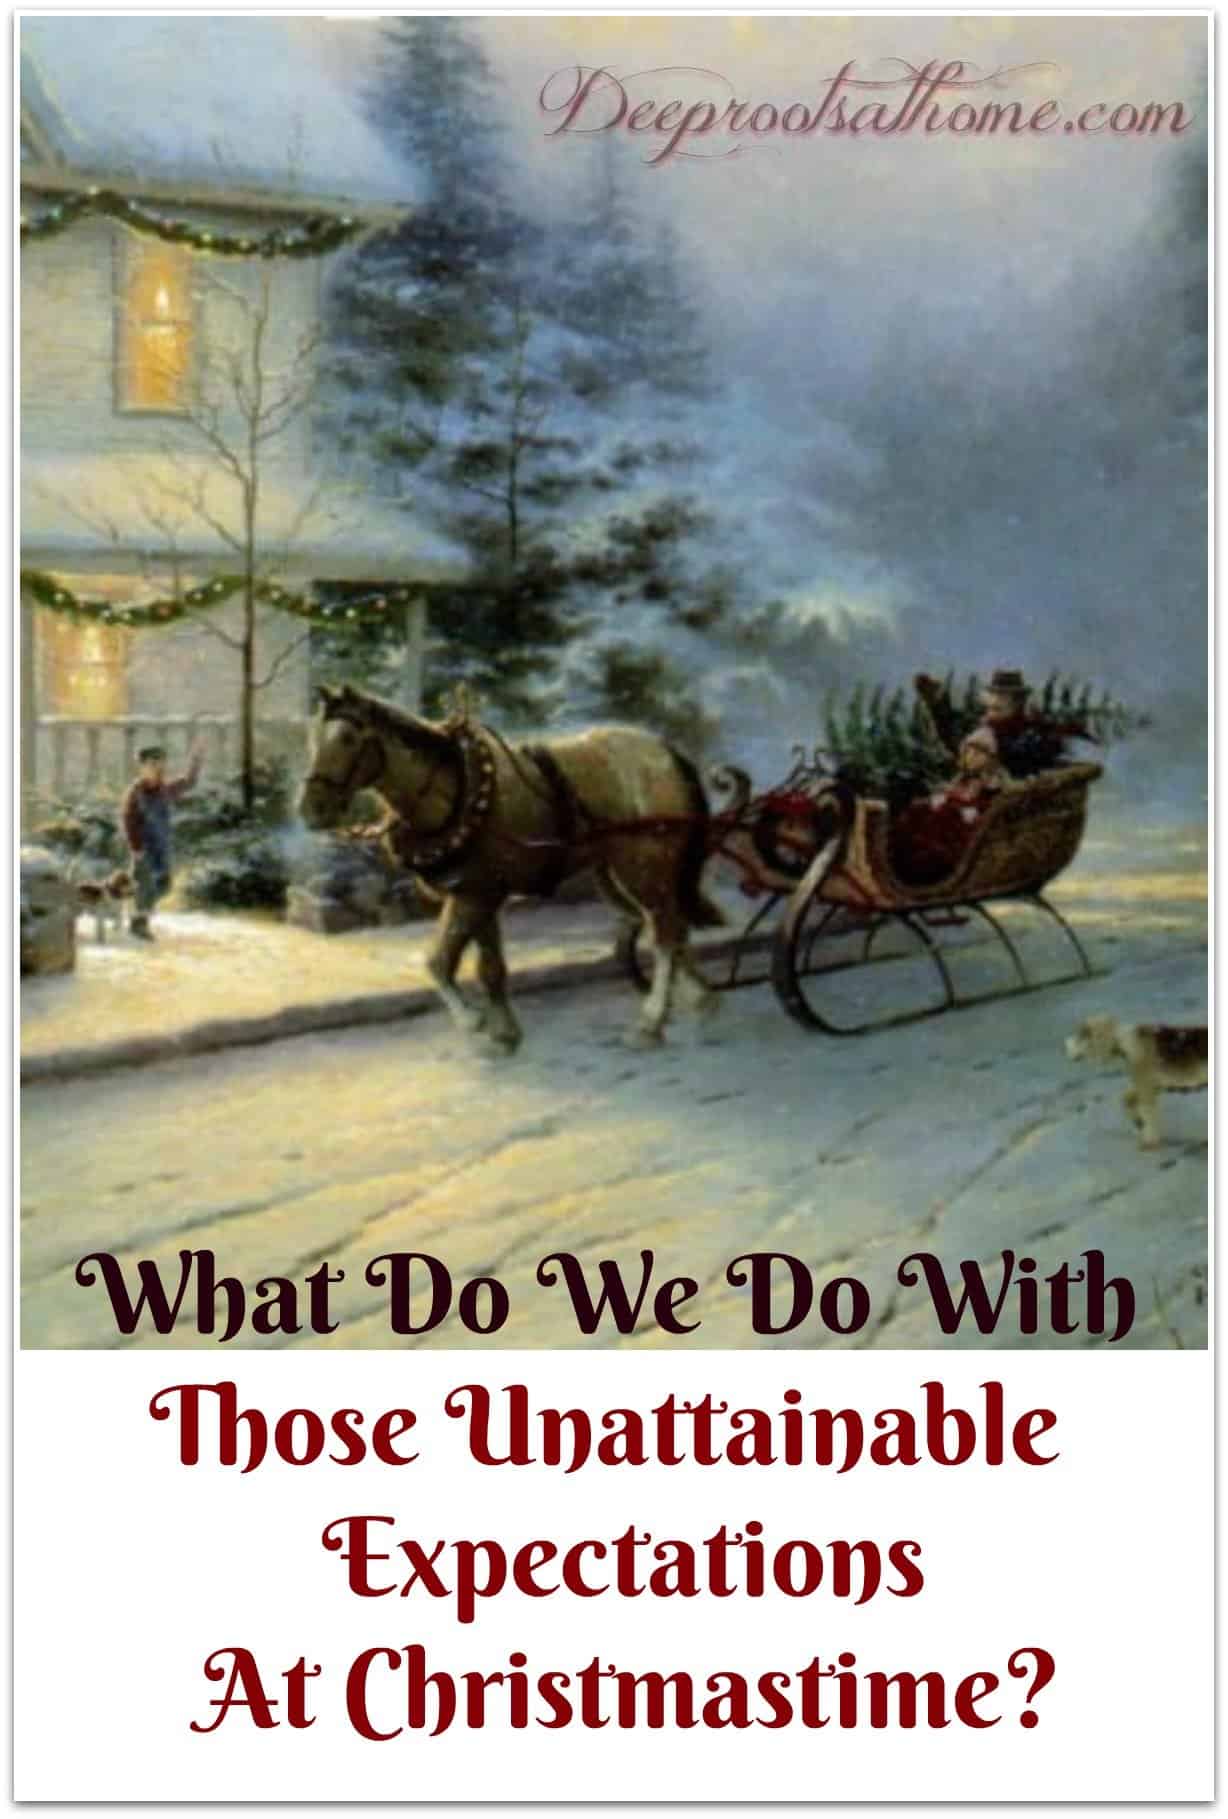 What Do We Do With Those Unattainable Expectations At Christmastime? sleigh ride